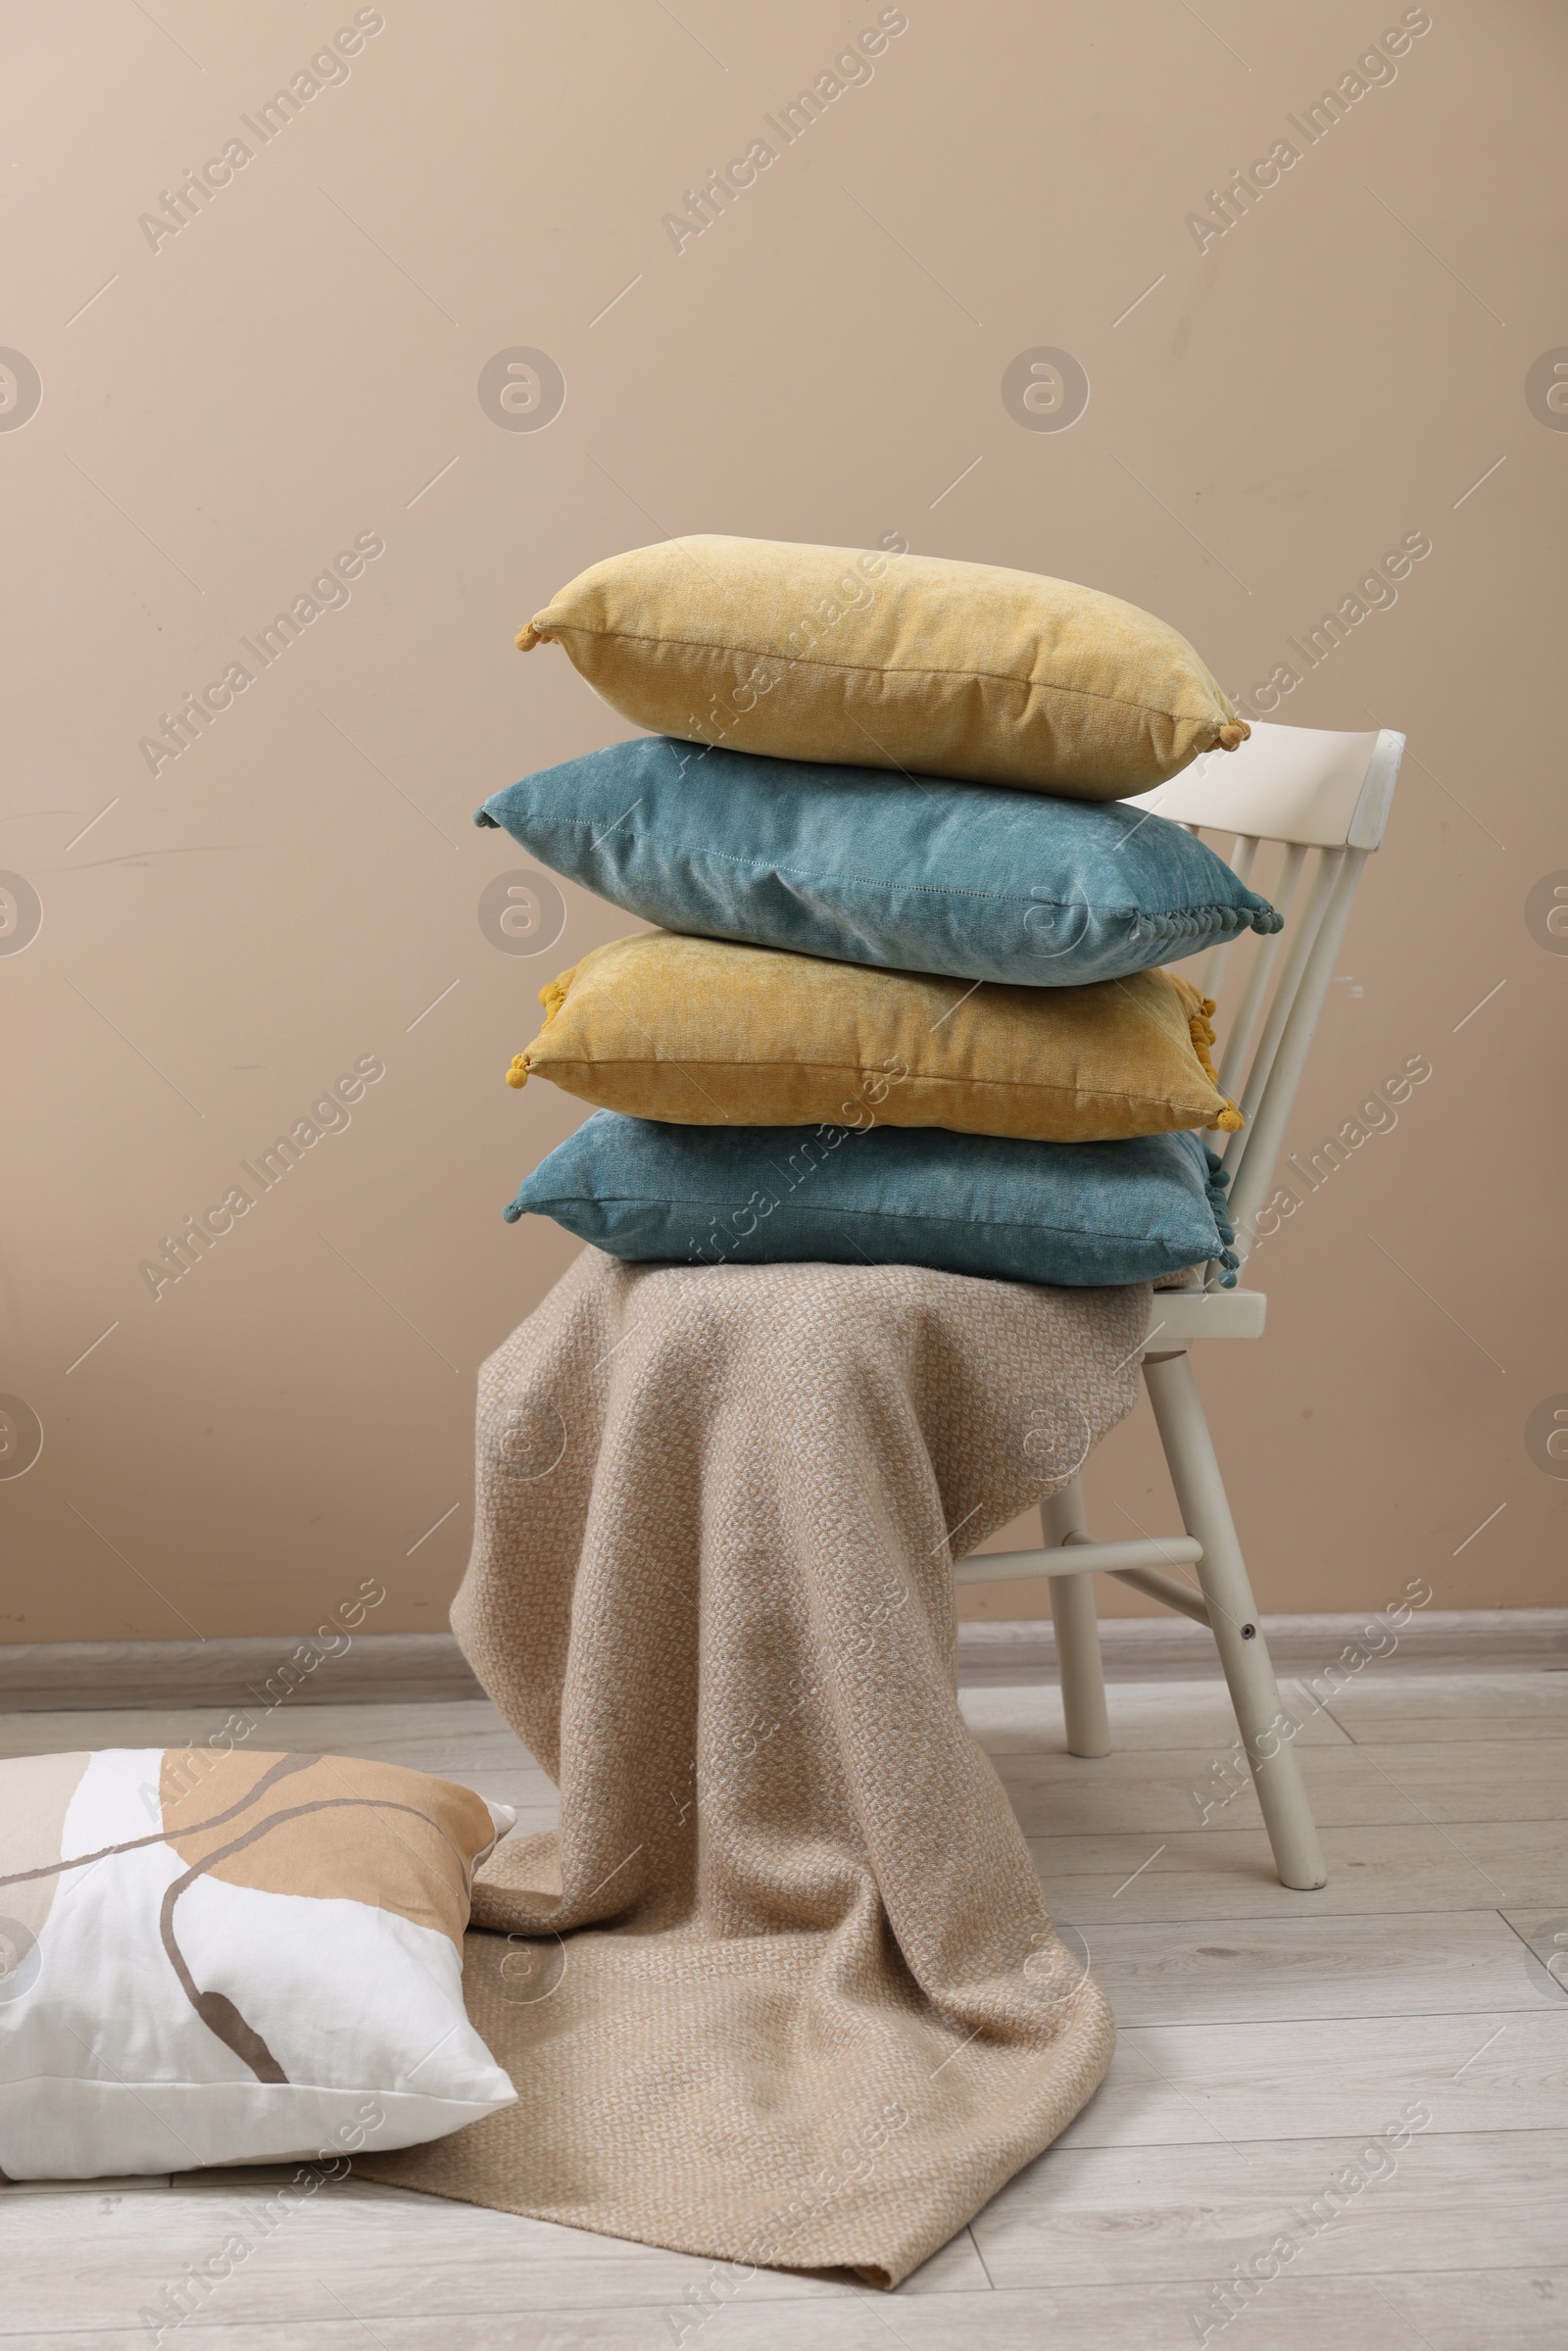 Photo of Soft pillows and warm blanket near beige wall indoors